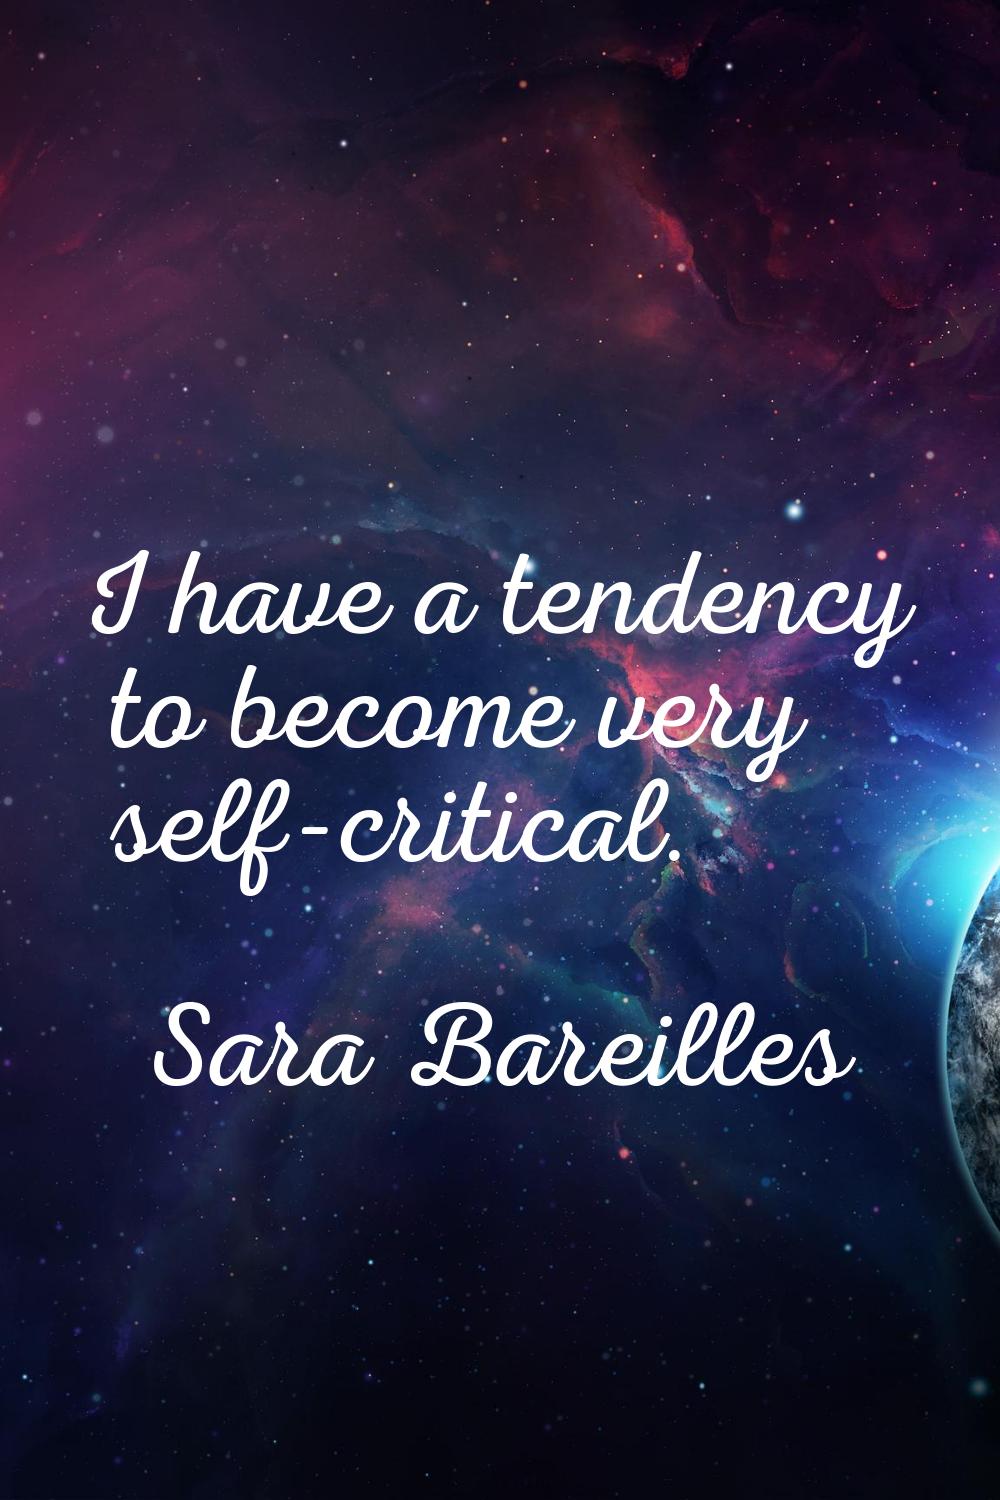 I have a tendency to become very self-critical.